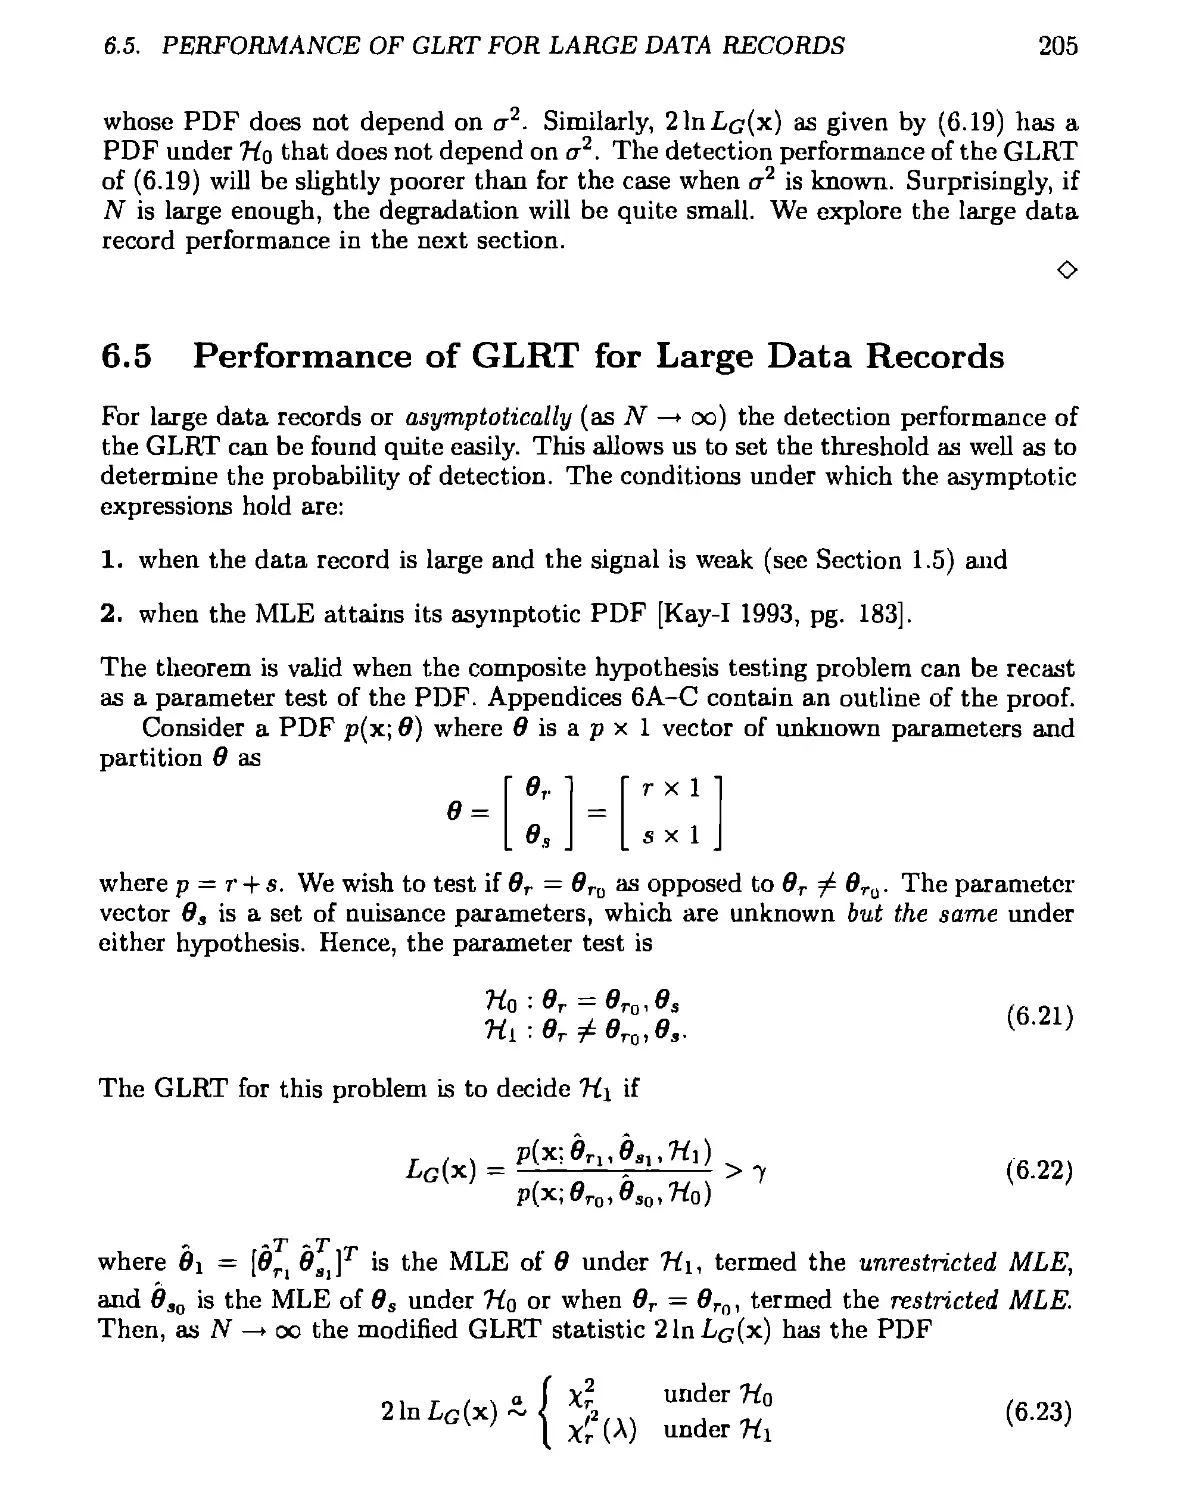 6.5 Performance of GLRT for Large Data Records